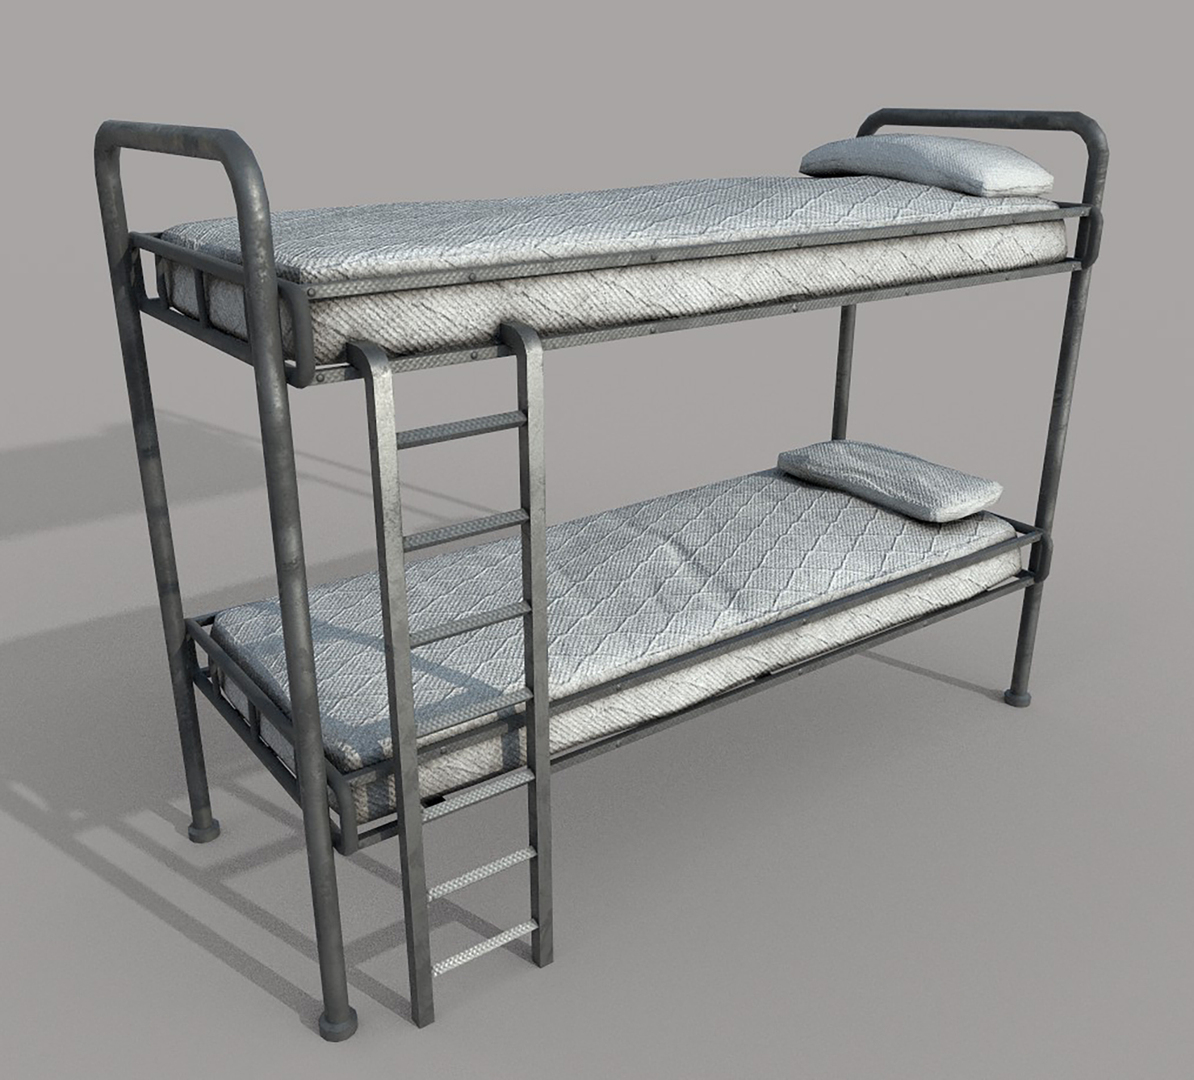 Old Bunk Bed Mattress And Pillows 3d, What Size Is A Bunk Bed Mattress